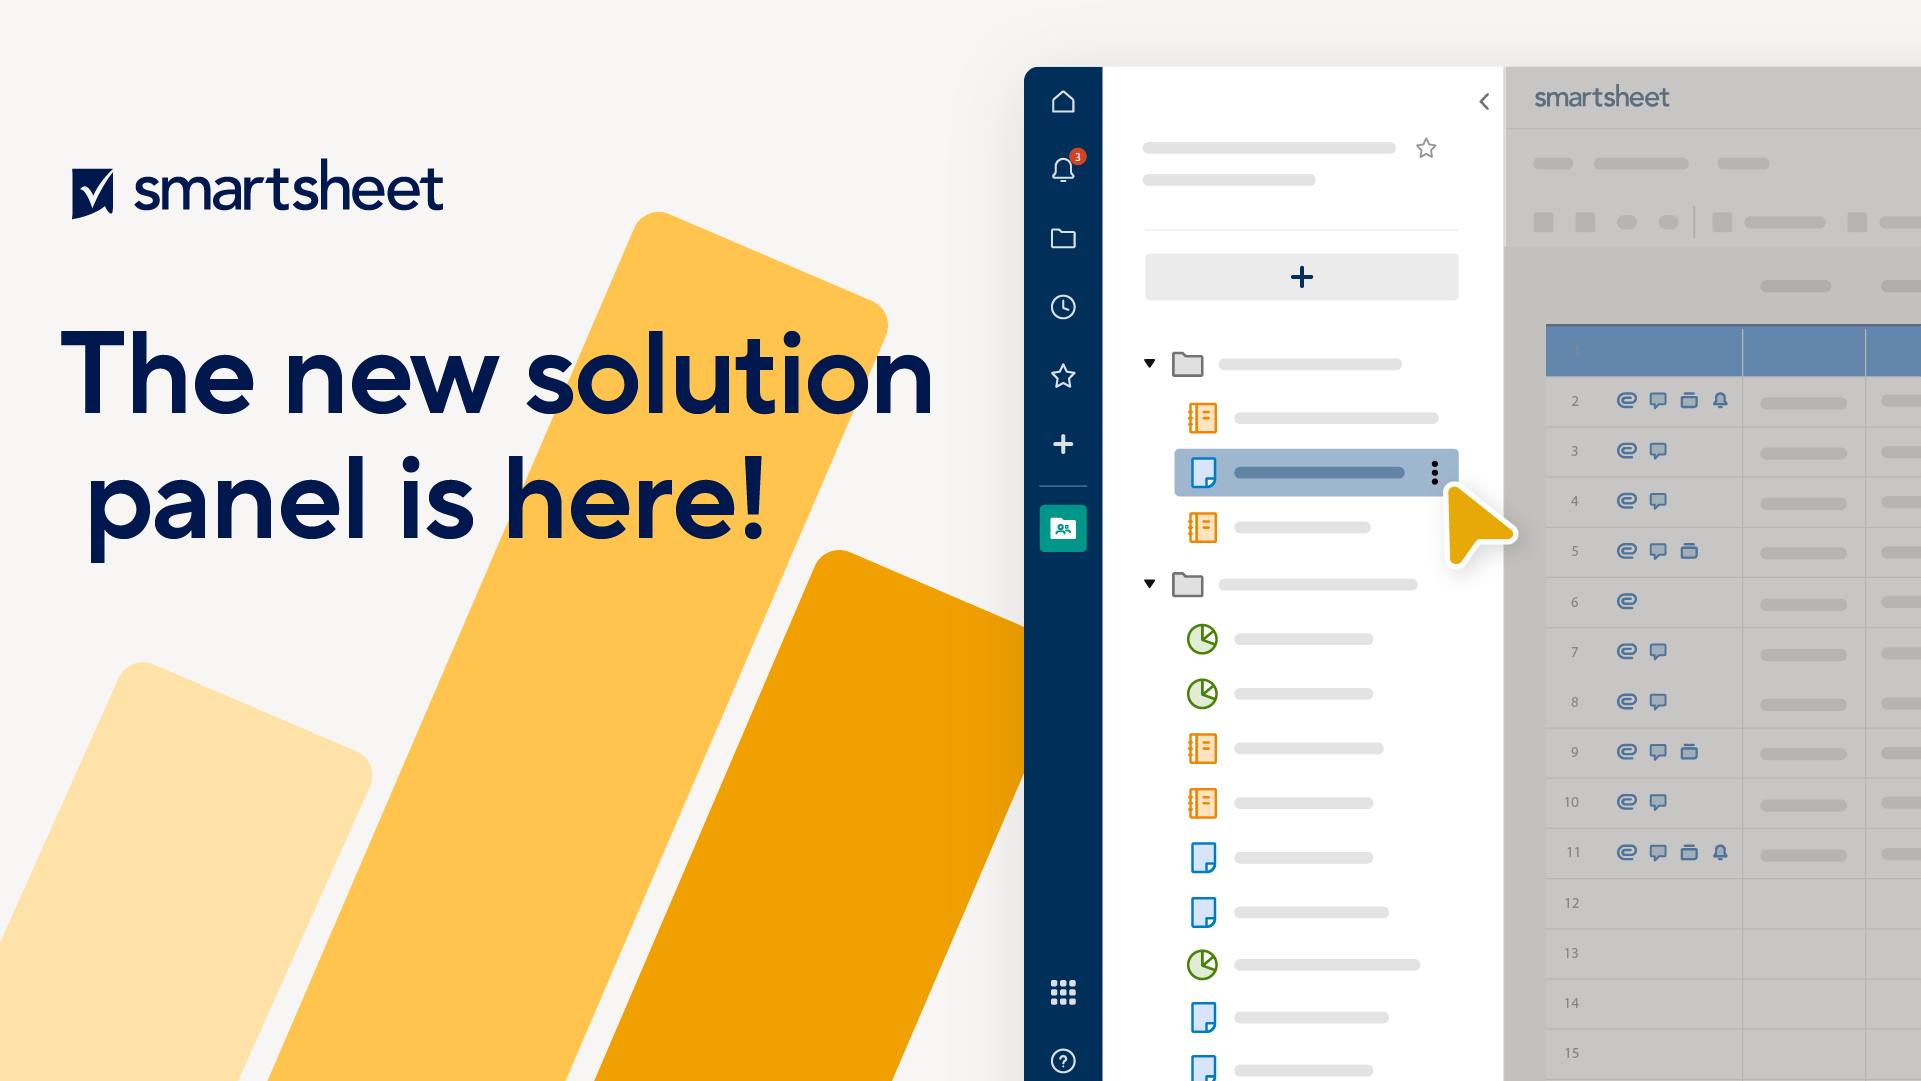 Smartsheet - The new solution panel is here! 